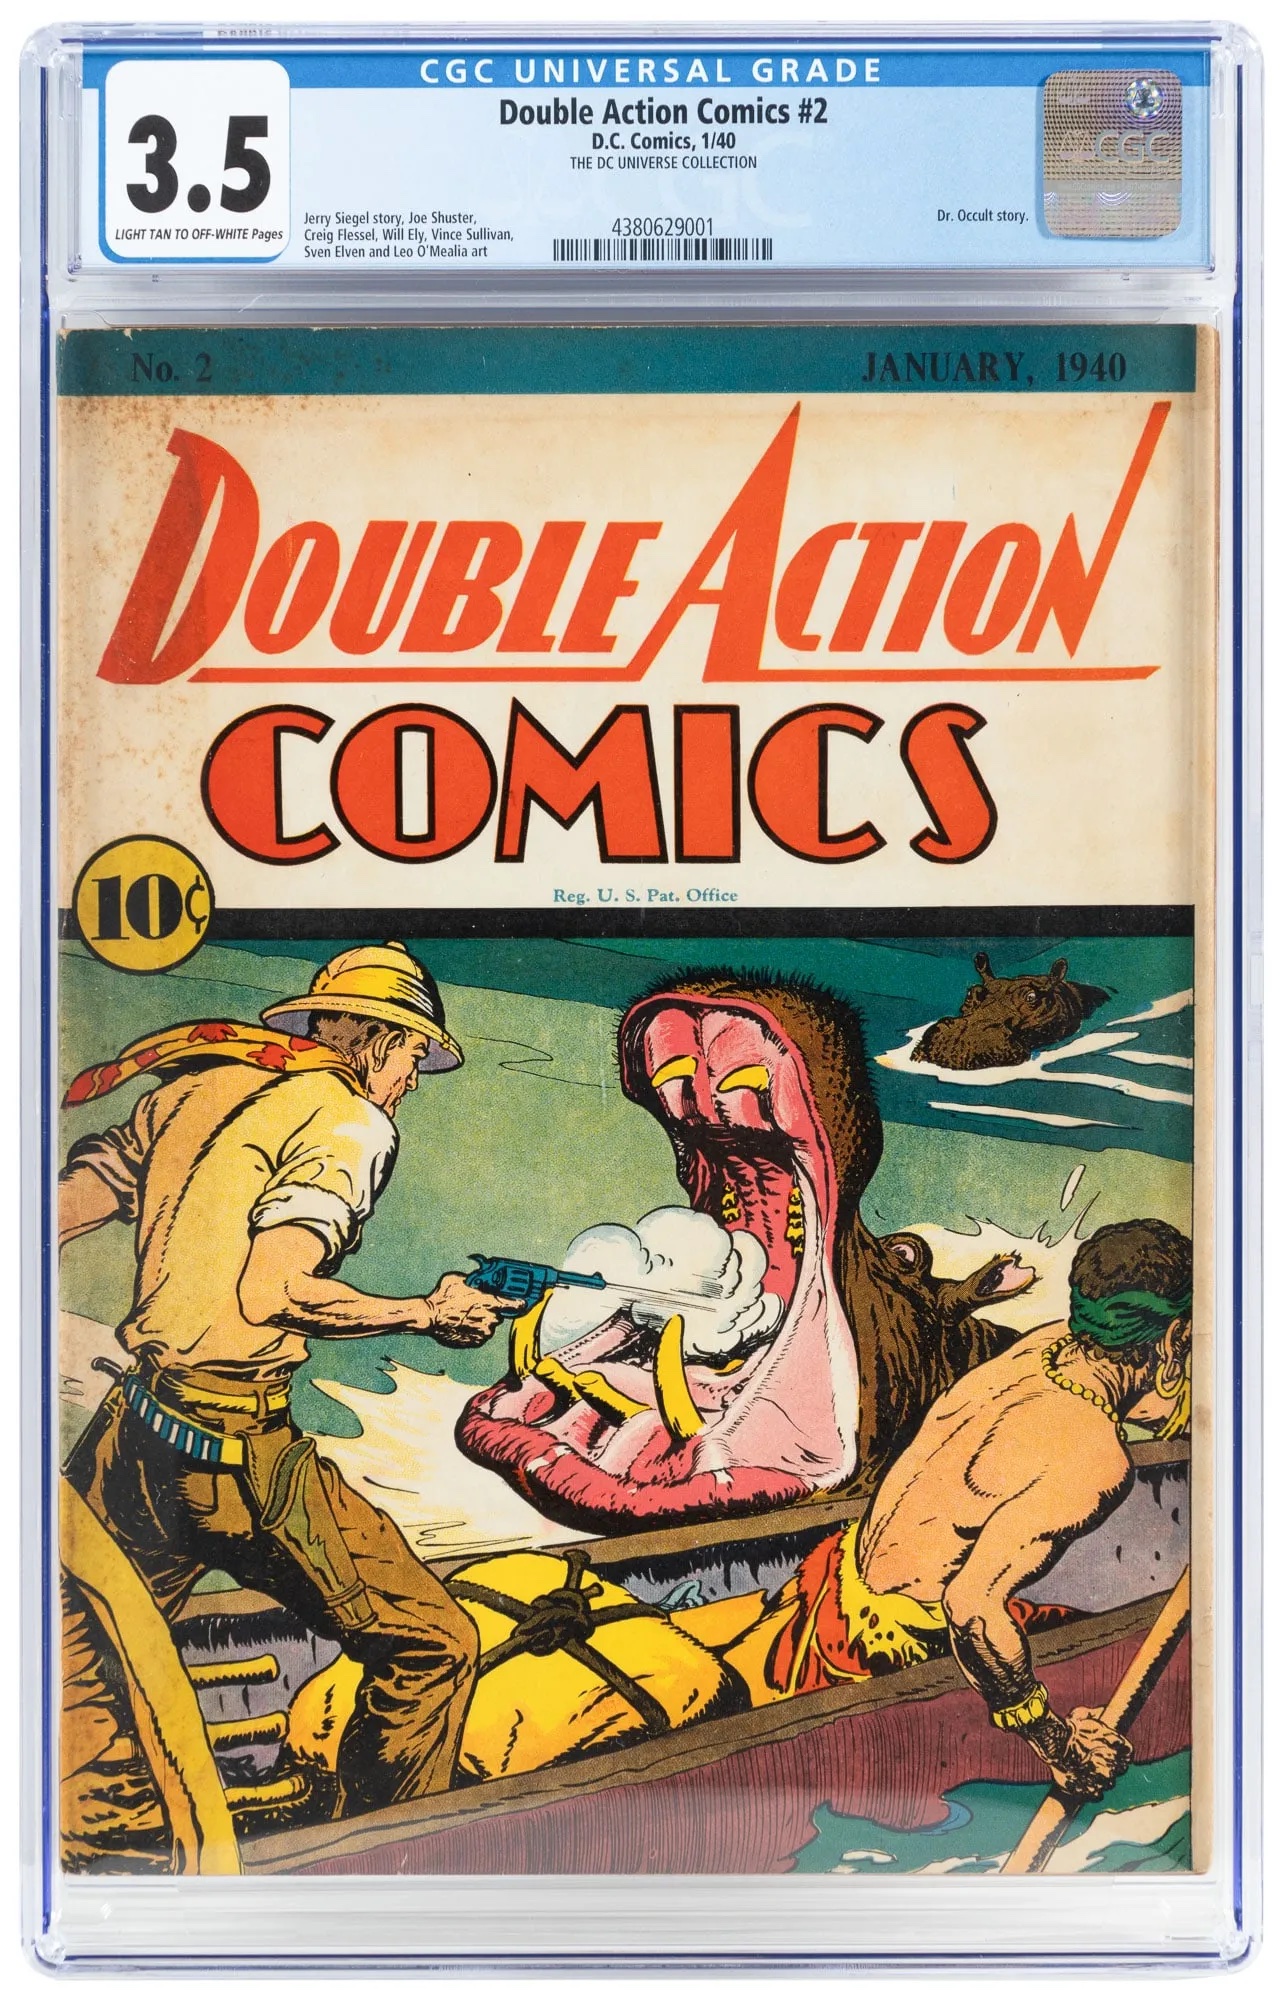 Double Action Comics #2, estimated at $20,000-$30,000 at PBA.